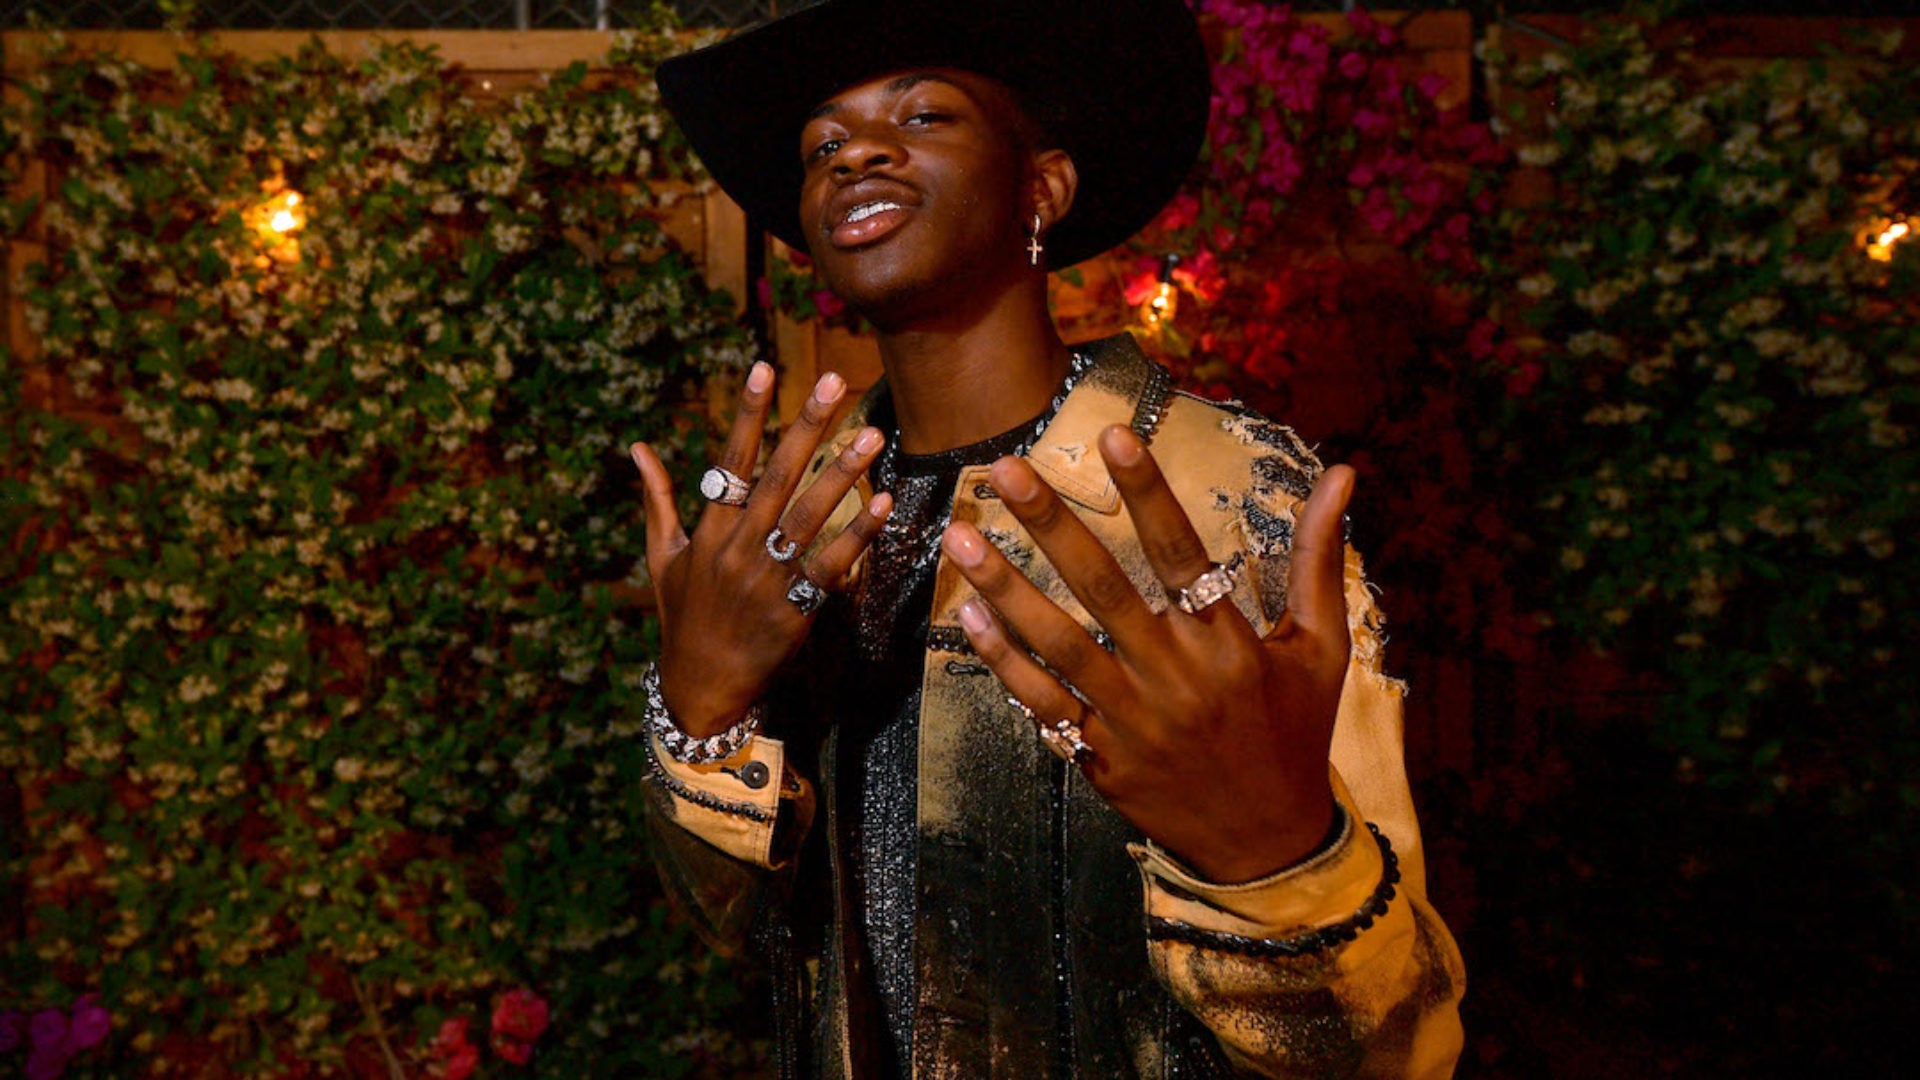 Lil Nas Xs Old Town Road Breaks Billboard Record With 17 Weeks At No 1 0404